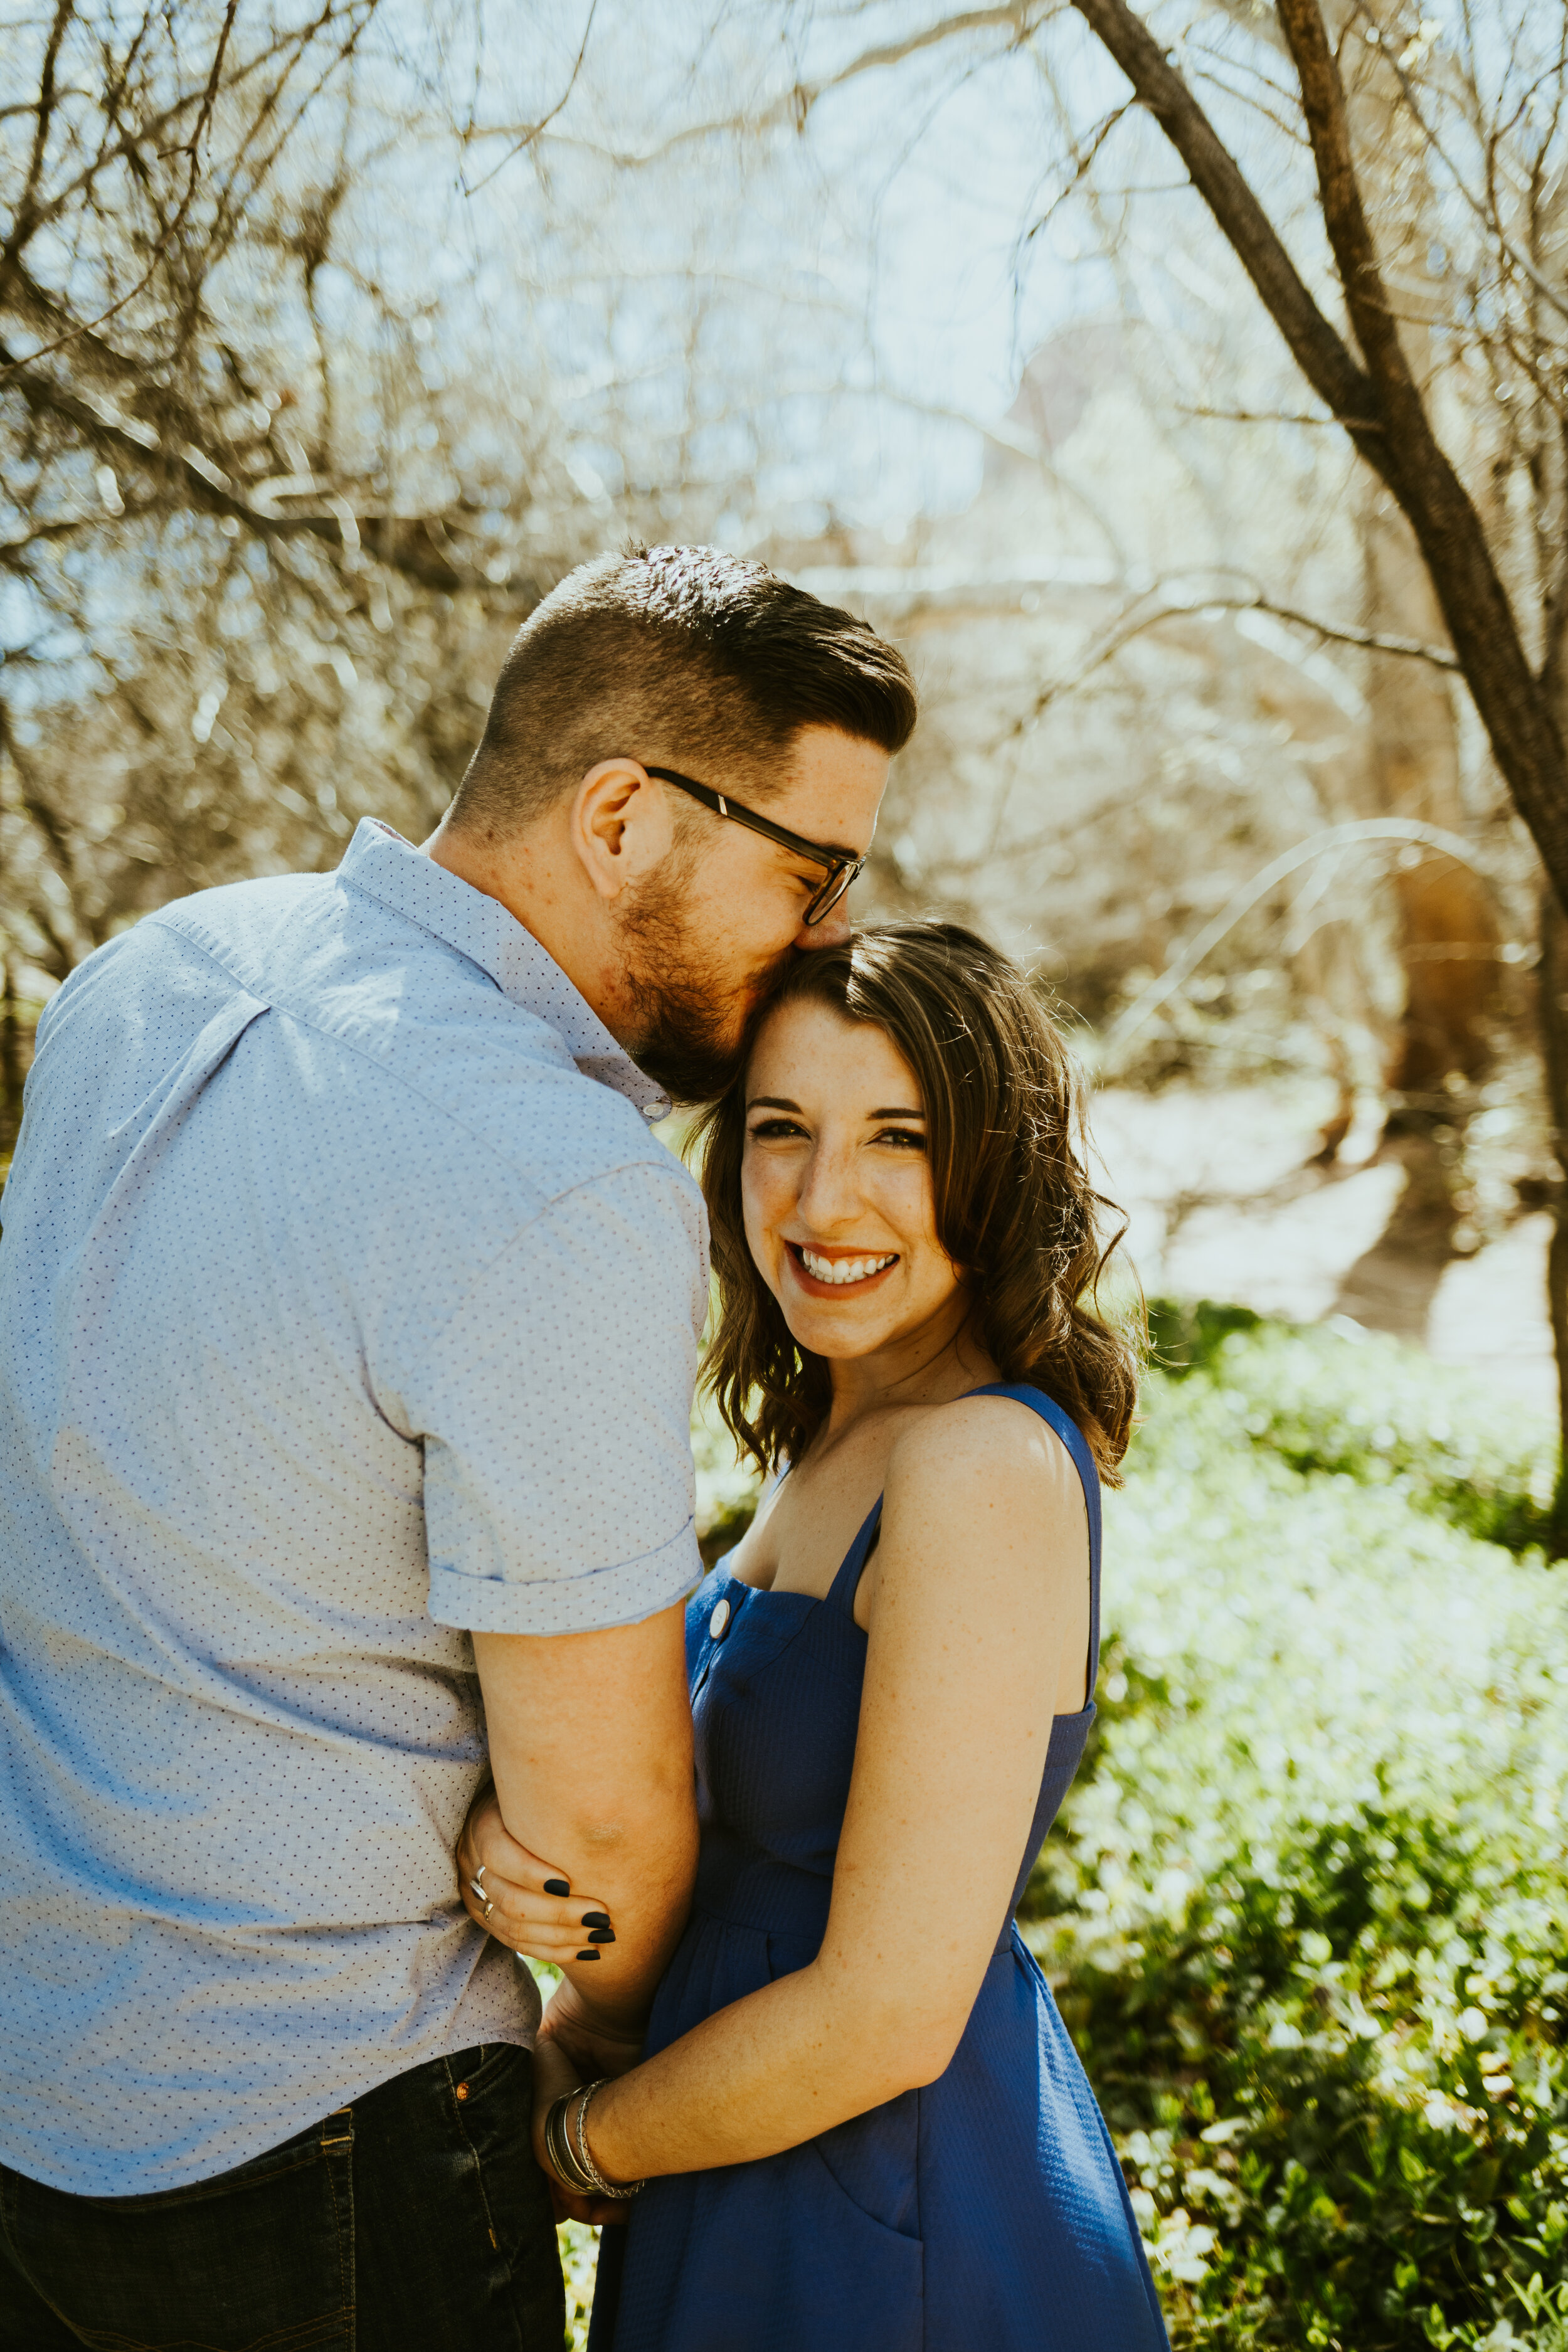 red rock crossing sedona arizona cathedral rock crescent moon ranch couple photos engagement photo outfit inspiration couple posing ideas midday photos-10.jpg